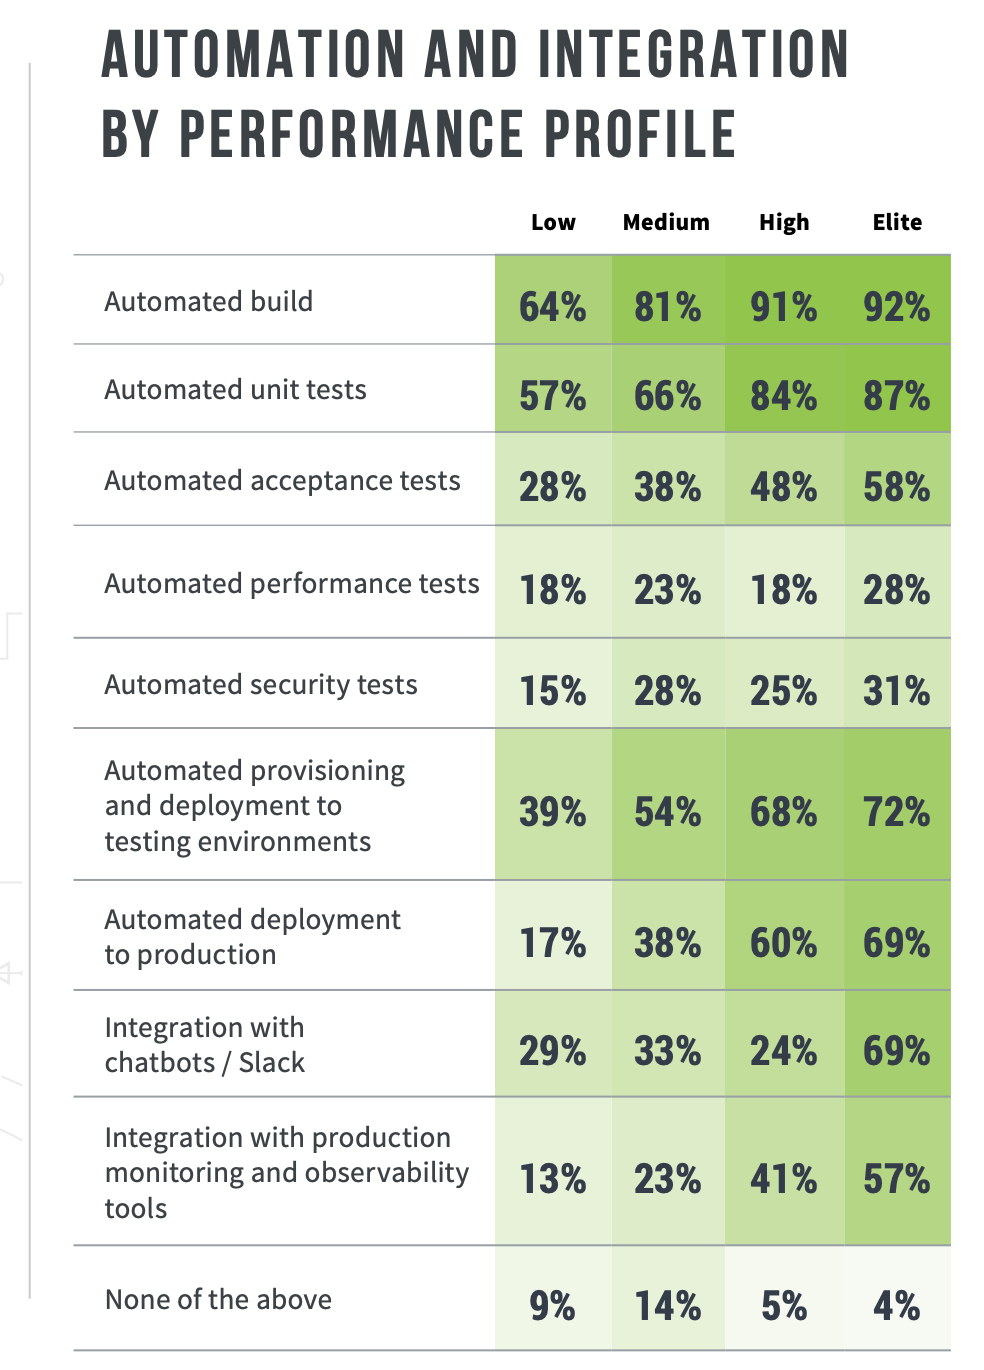 Automation and integration by performance profile